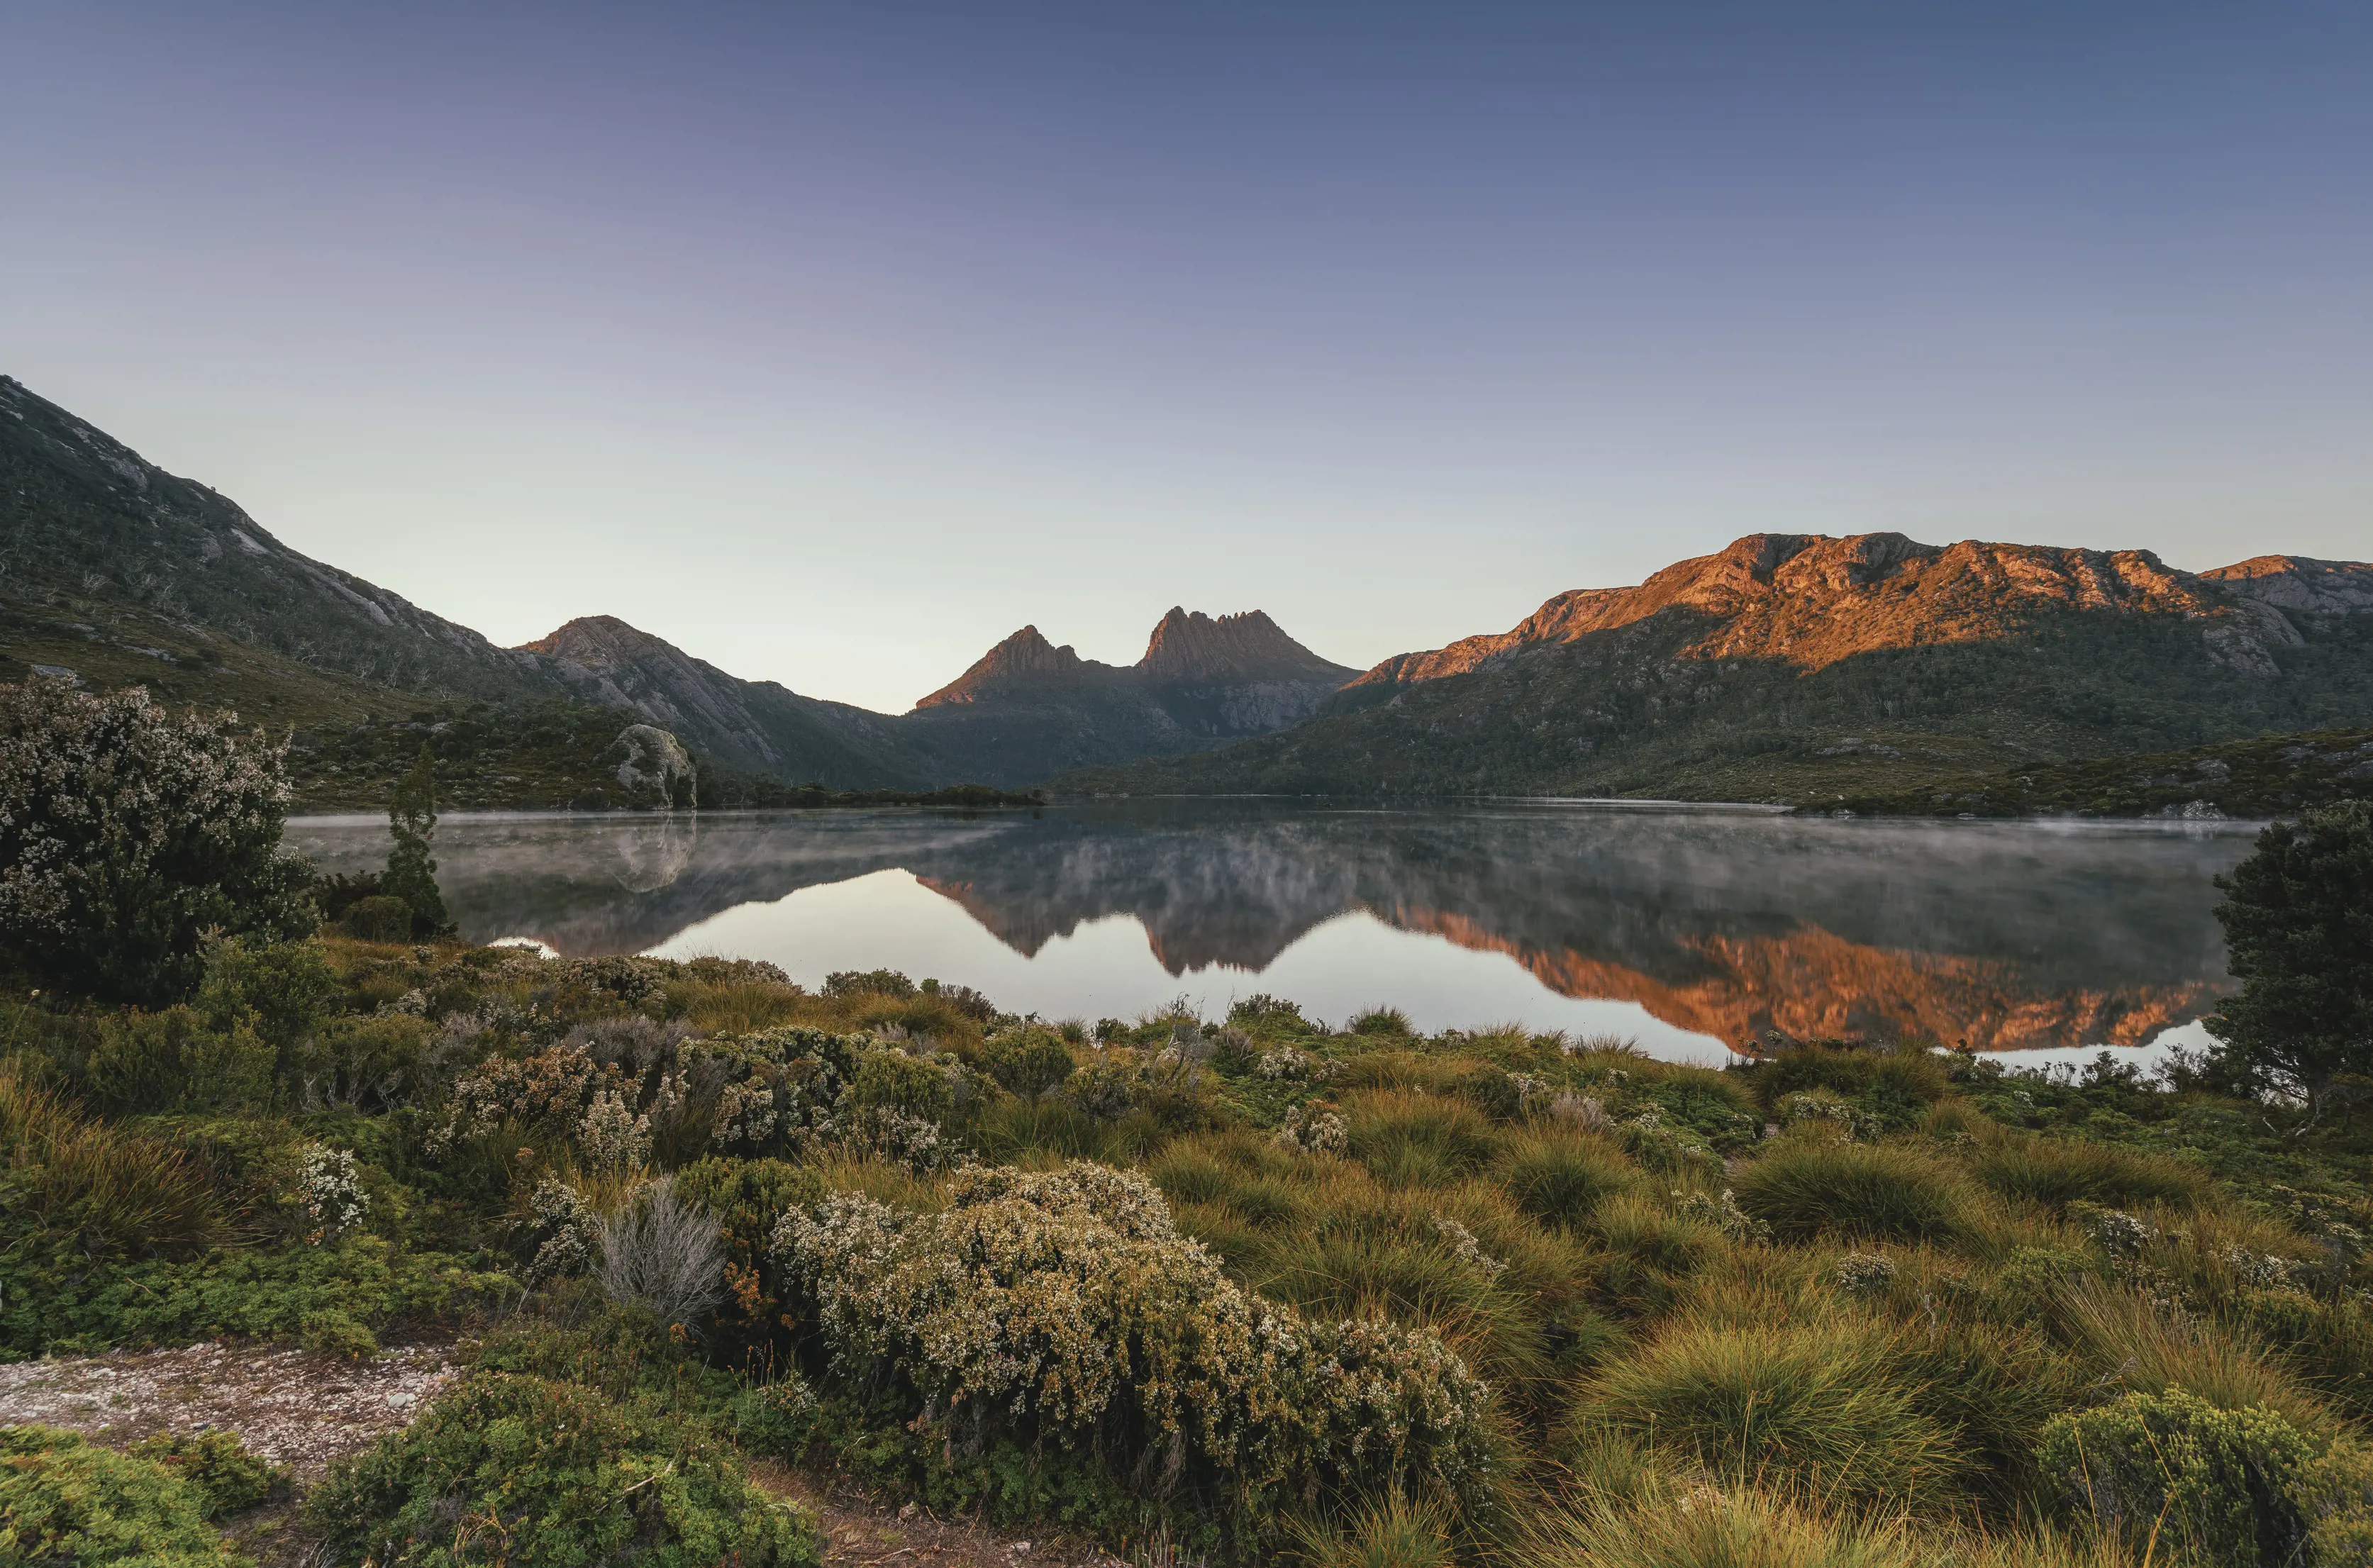 View of Cradle Mountain across the glassy Dove Lake.